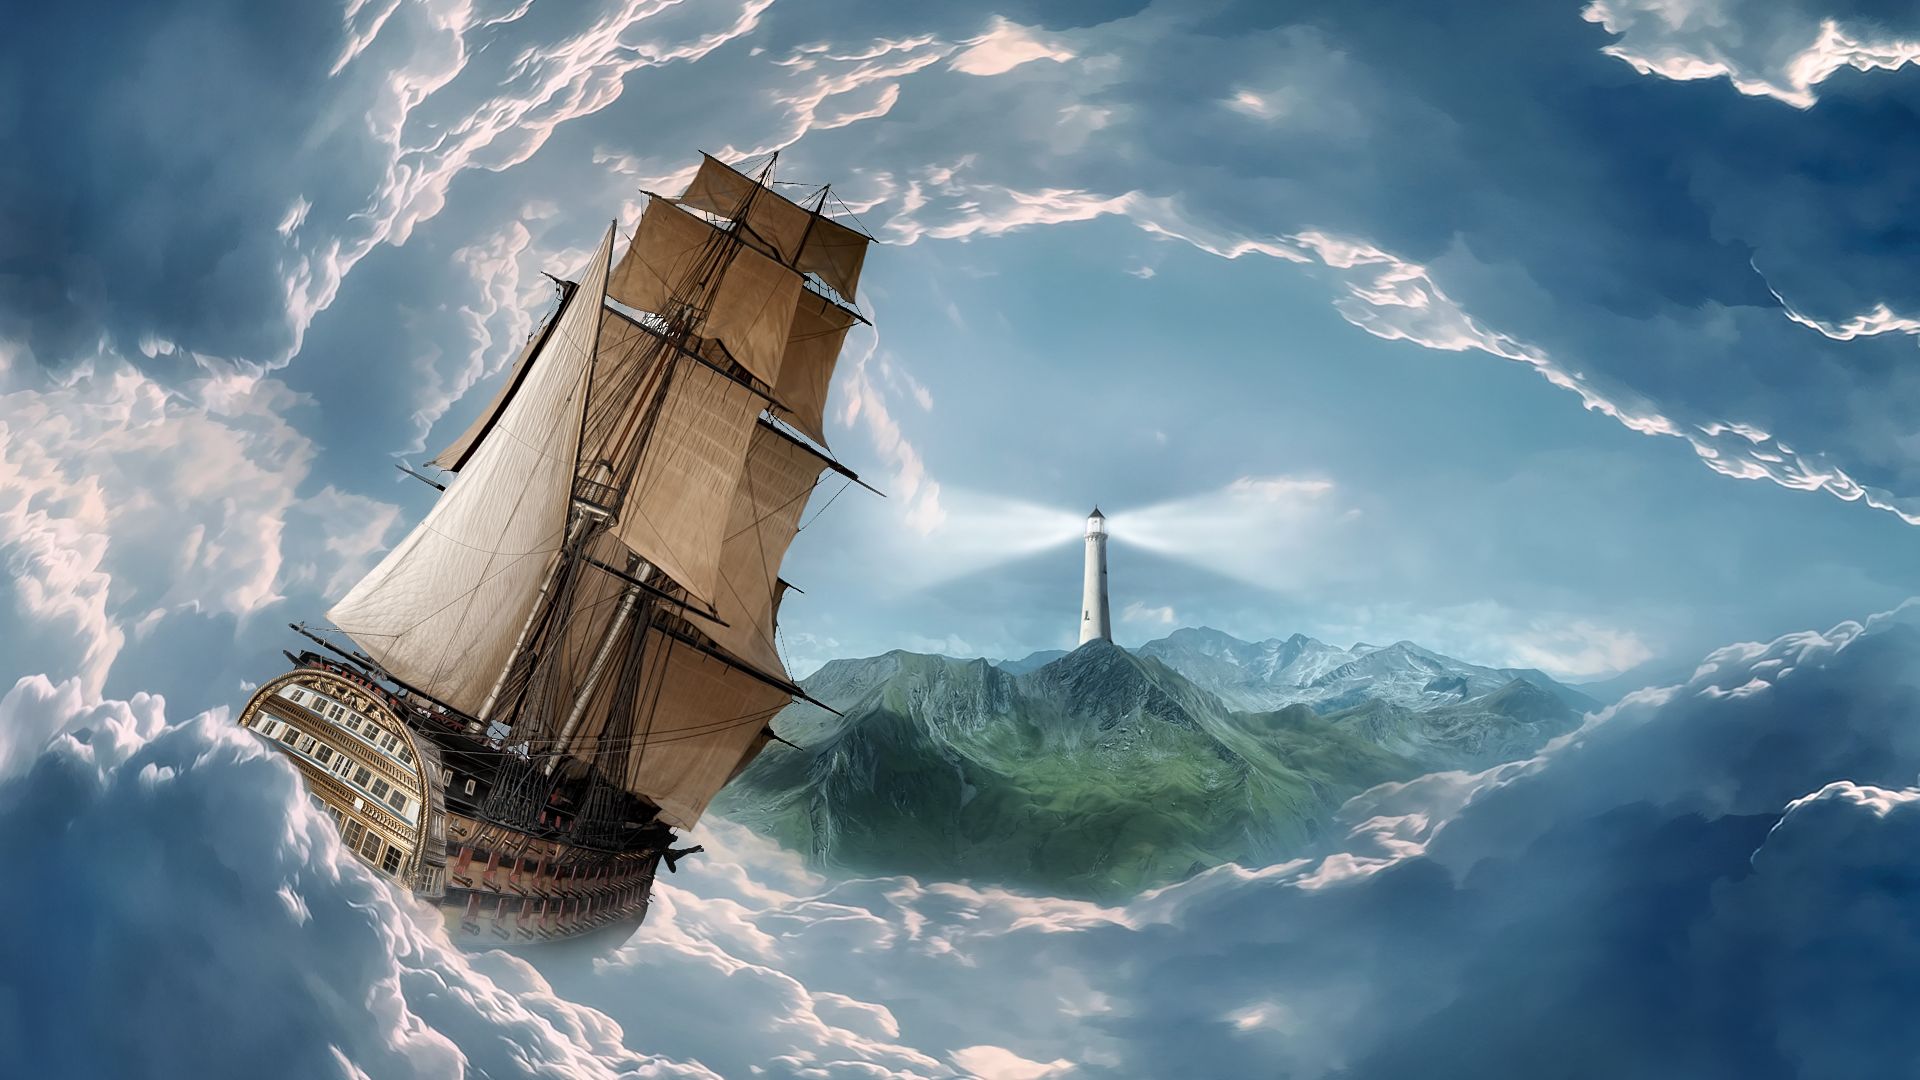 Wallpaper Voyage and lighthouse in clouds